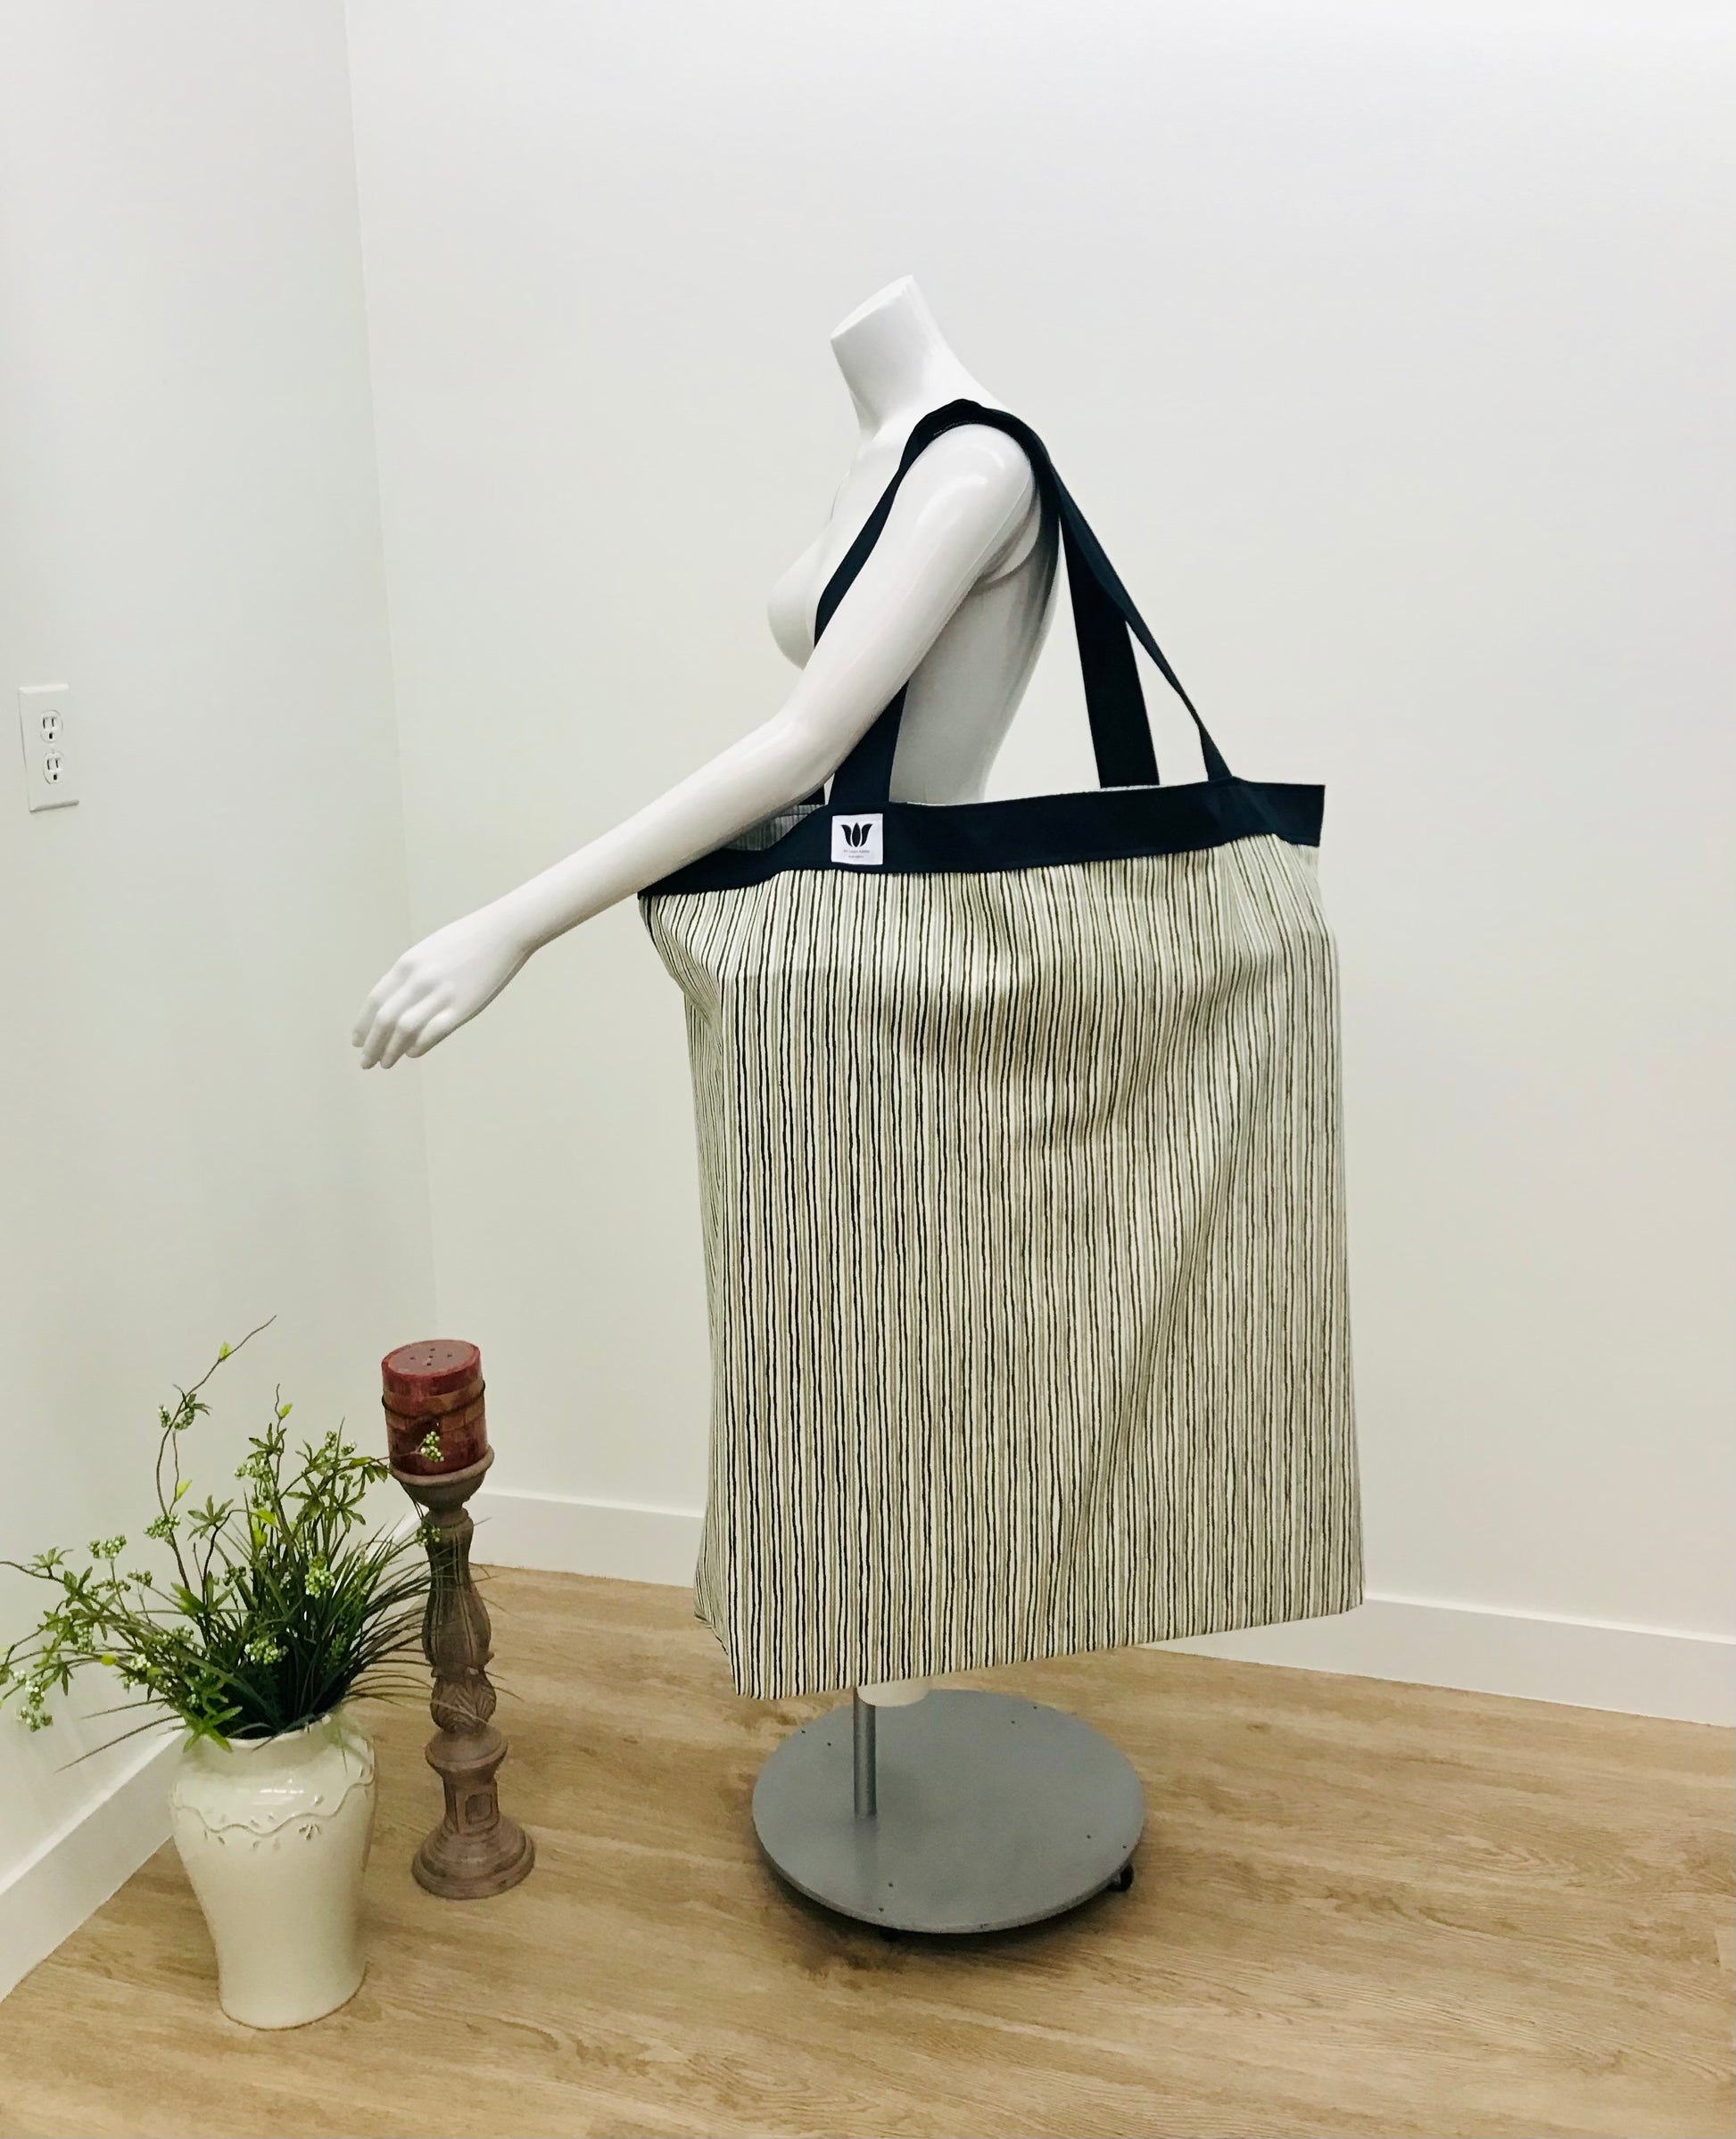 Extra large Yoga Tote in sturdy cotton canvas to carry and or store yoga props for yoga practice. Made in Canada by My Yoga Room Elements